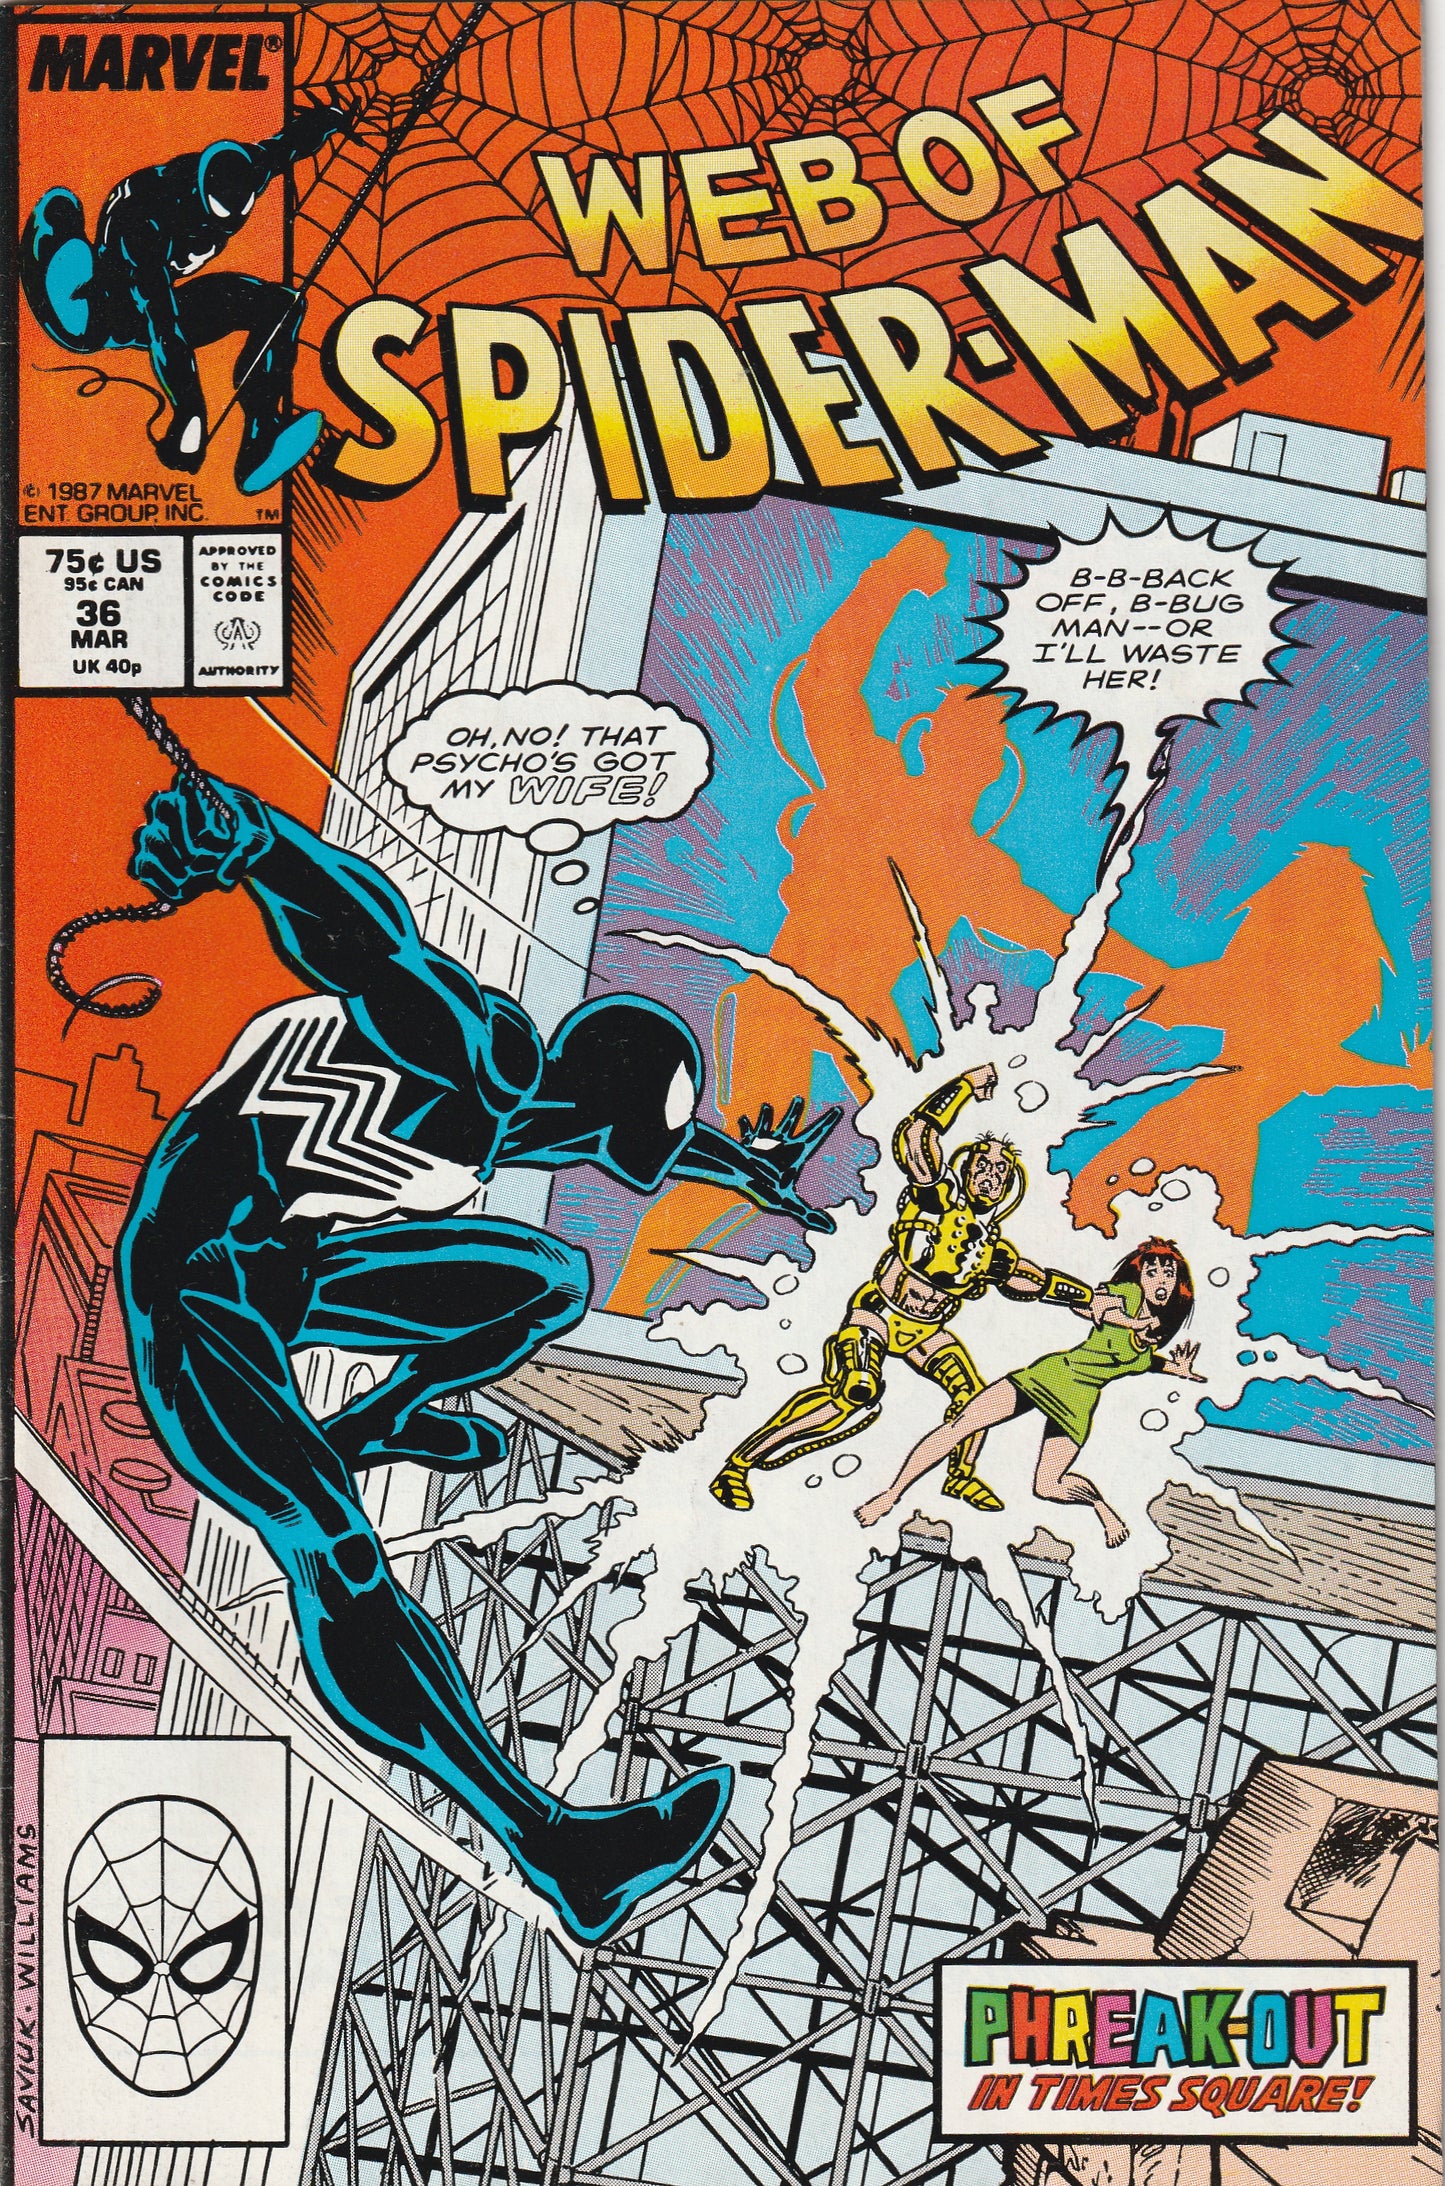 Web of Spider-Man #36 (1988) - 1st Appearance of Tombstone (Lonnie Lincoln), Black costume